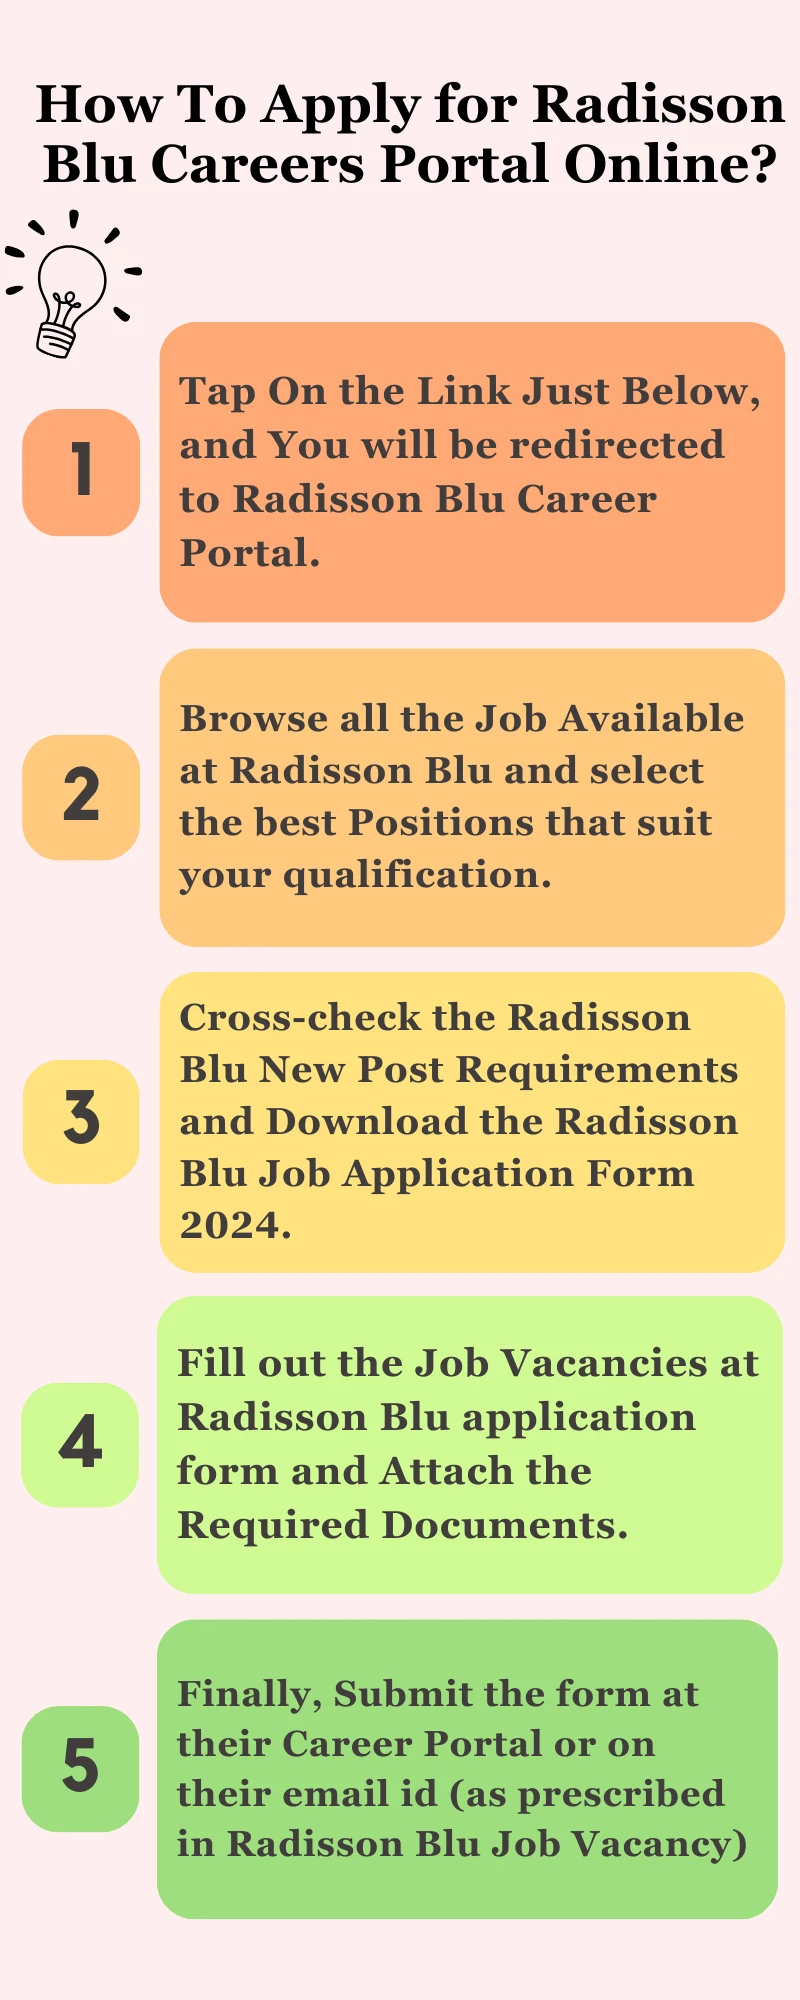 How To Apply for Radisson Blu Careers Portal Online?